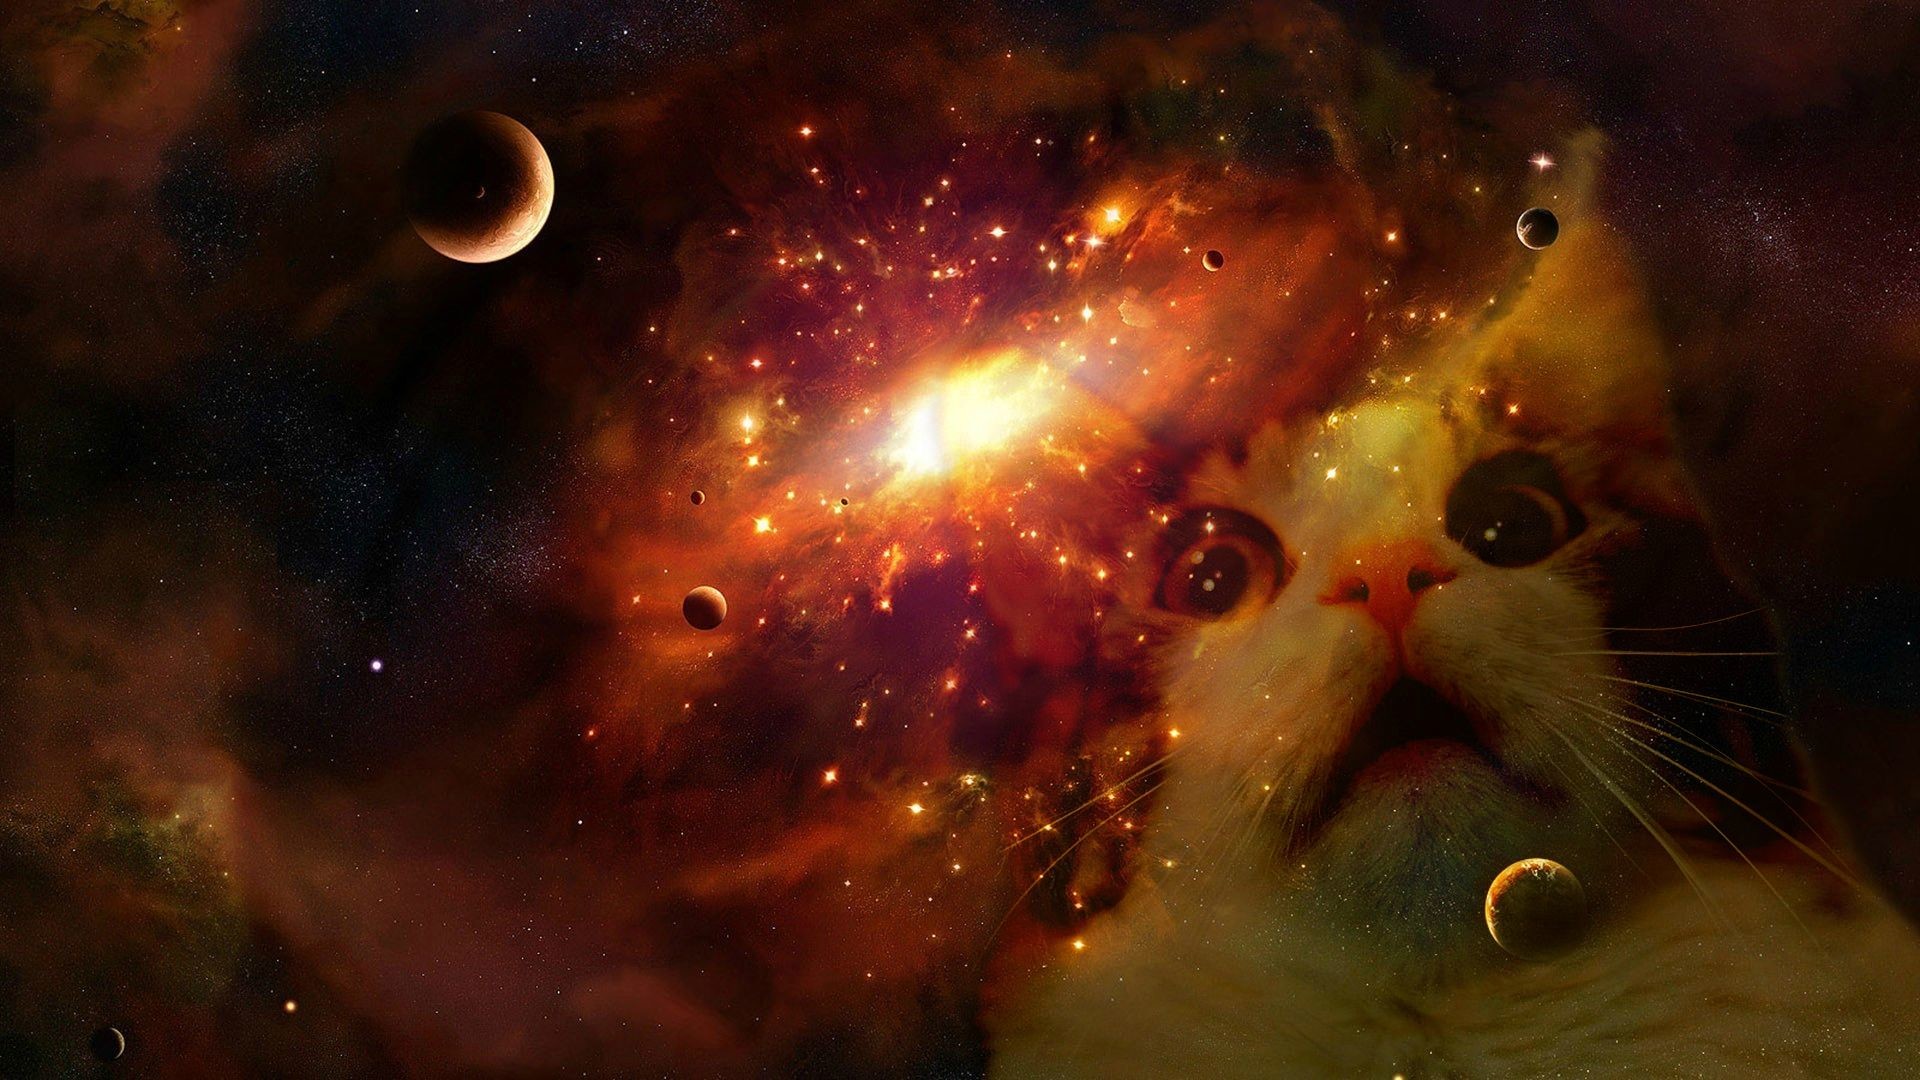 Space cat (my first attempt at Photoshop) …